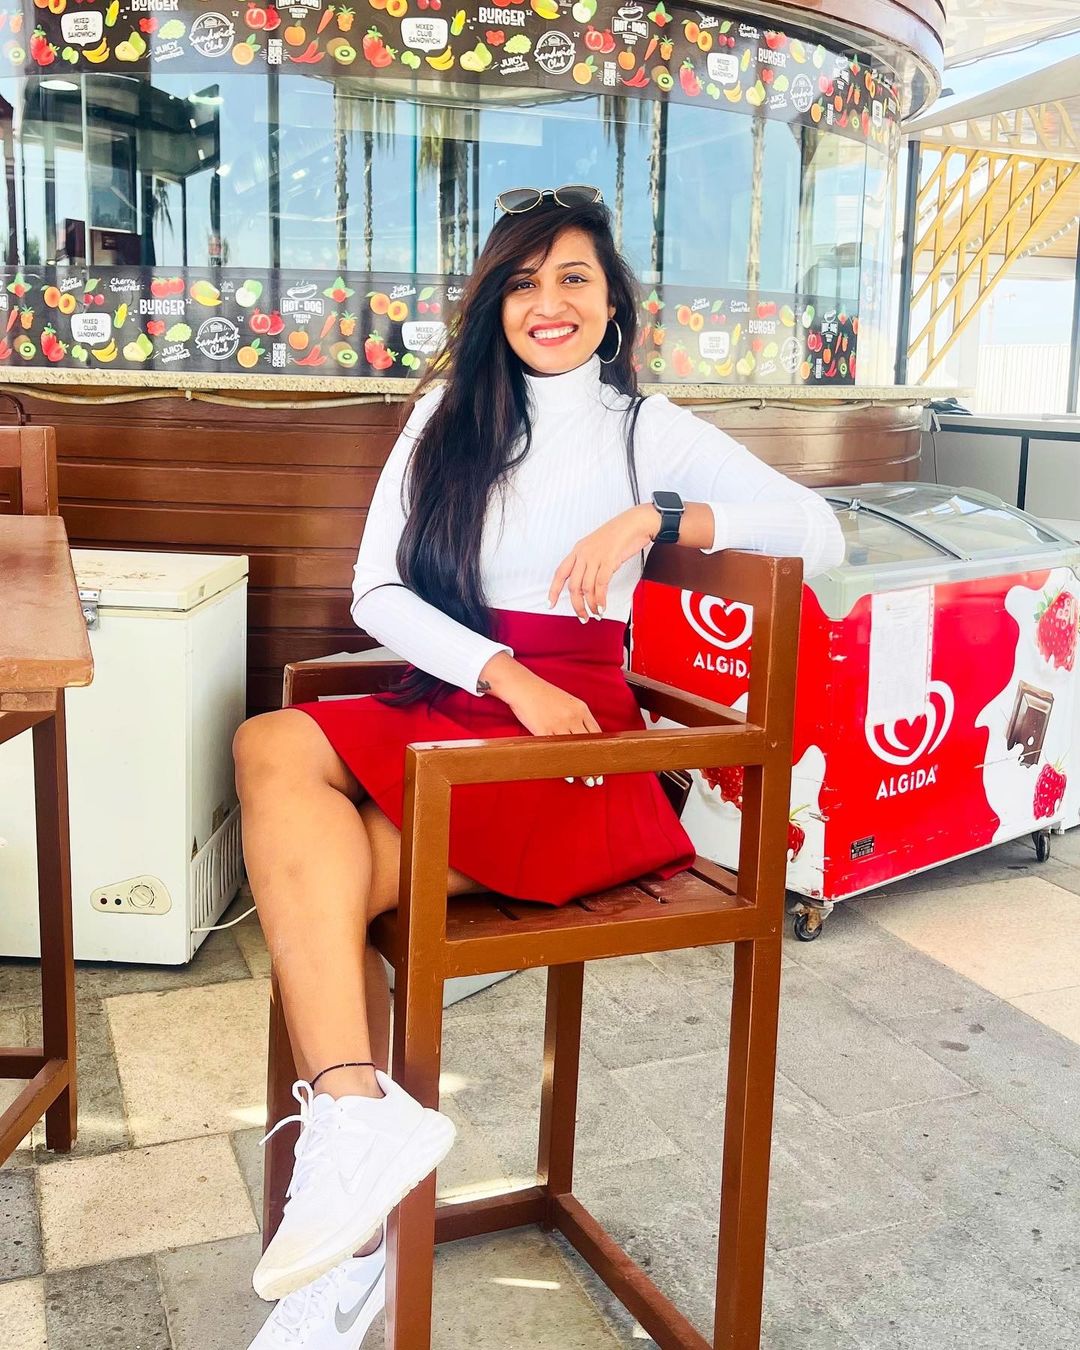 Photo of Dr Snehal Adsule a Wellness Coach and Female Health Influencer in a White Long Sleeves Top and Red Skirt